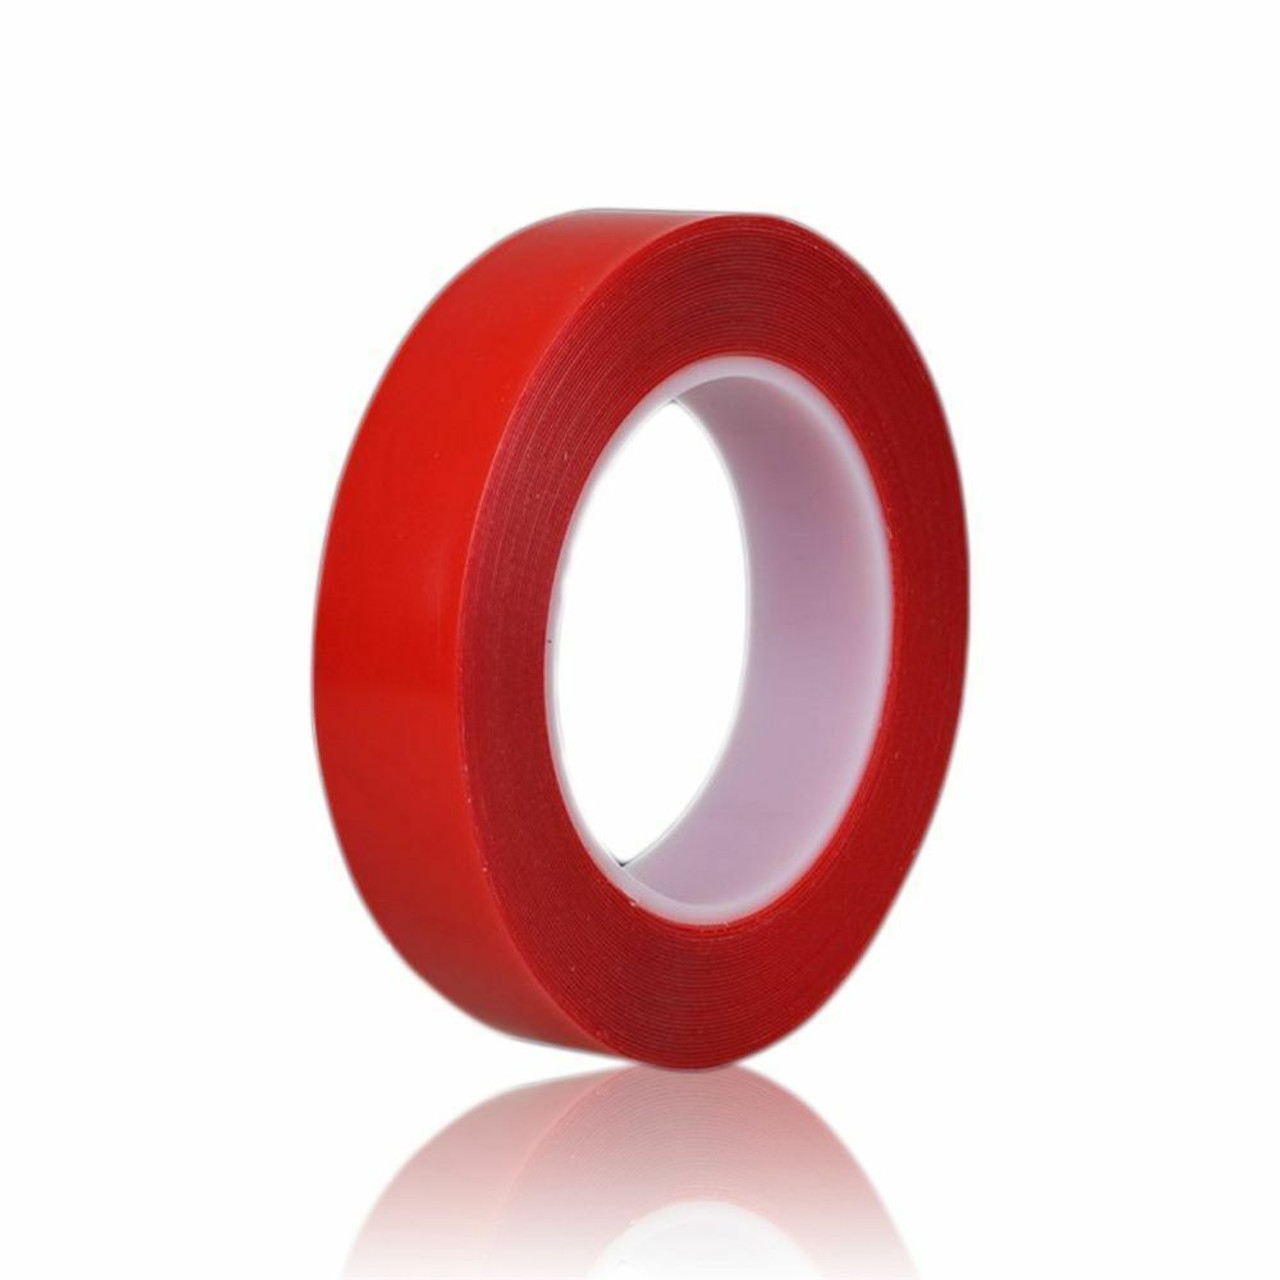 25M RED Film 3M Transparent DOUBLE SIDED STICKY ADHESIVE TAPE Cell Phone Repair